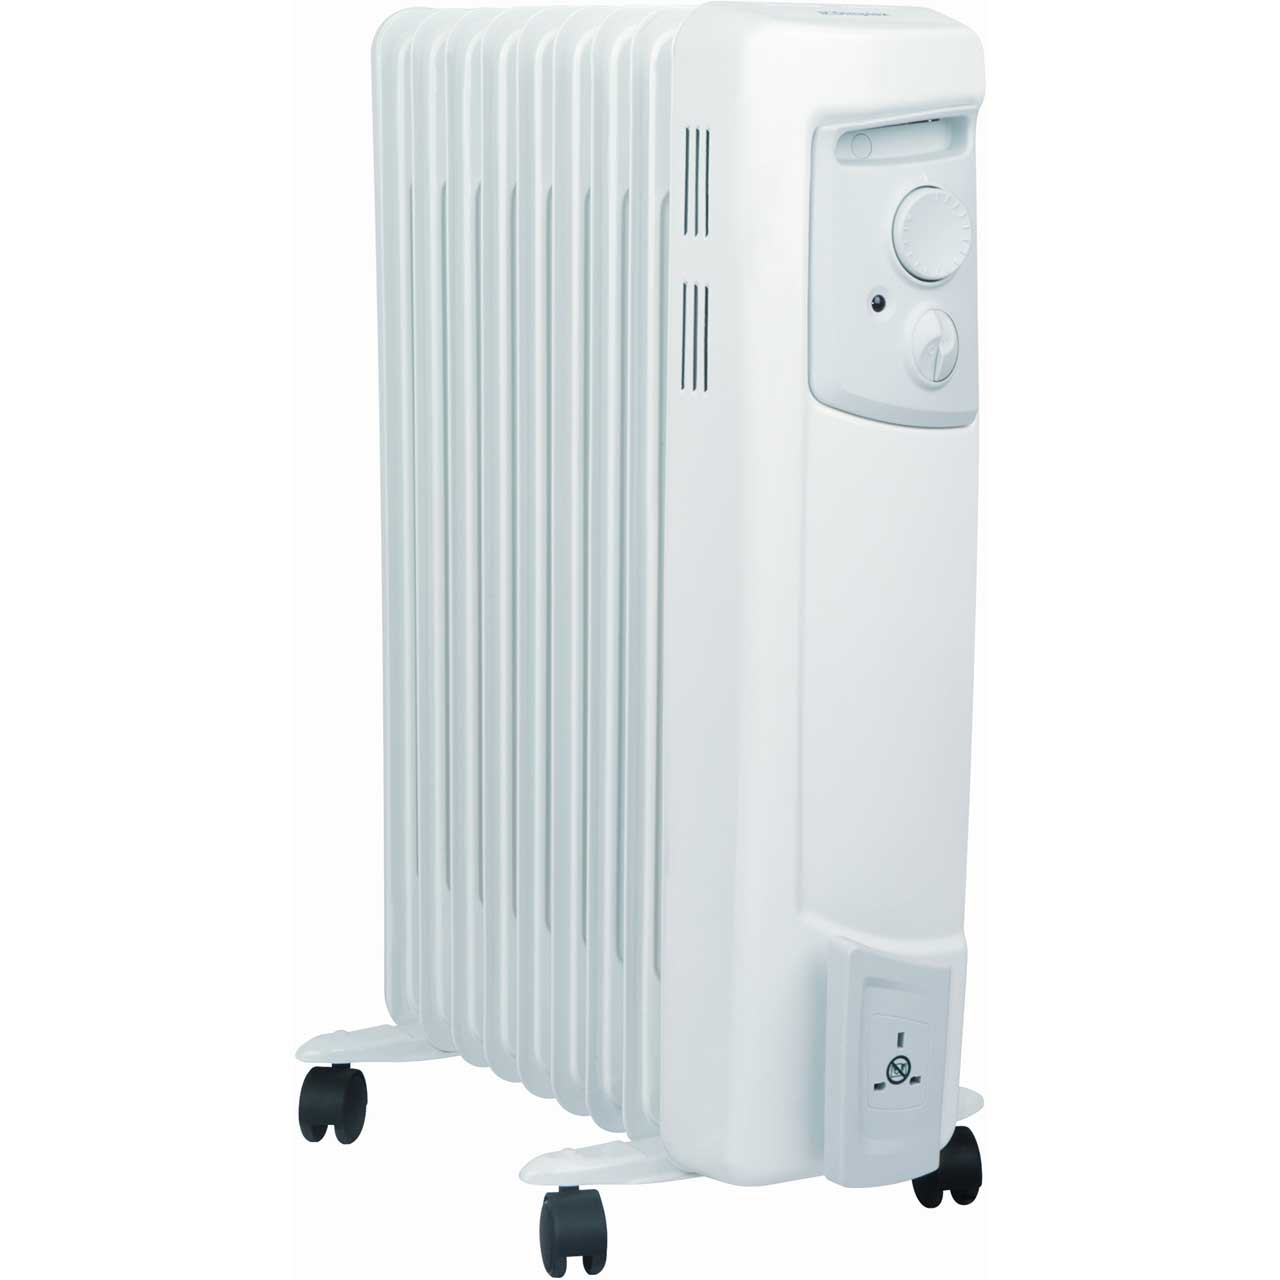 Dimplex OFC2000 Oil Filled Radiator 2000W Review